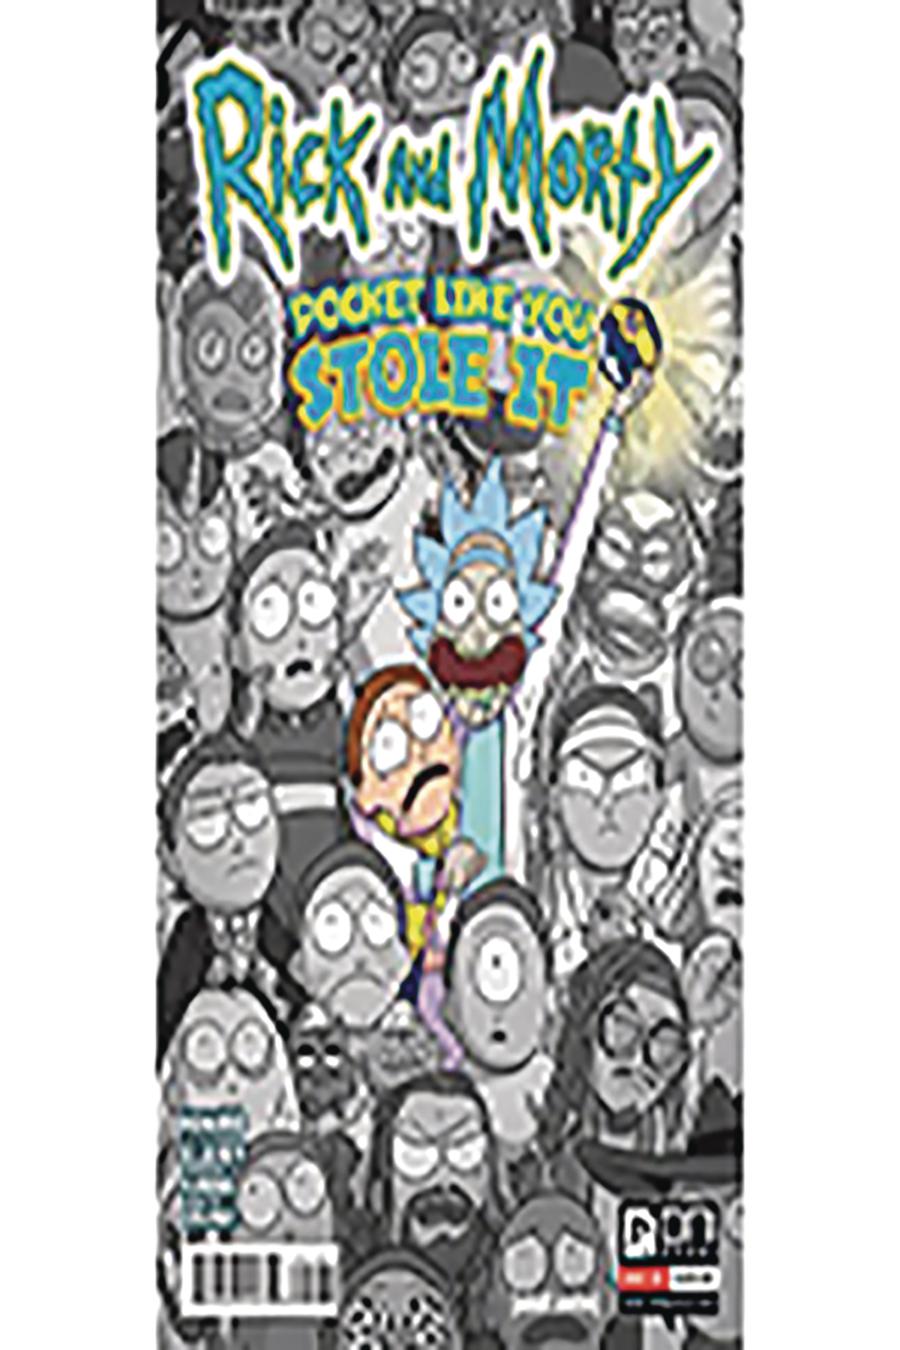 Rick And Morty Pocket Like You Stole It #1 Cover C DF Jetpack Comics Forbidden Planet Exclusive Marc Ellerby Spot Color Variant Cover